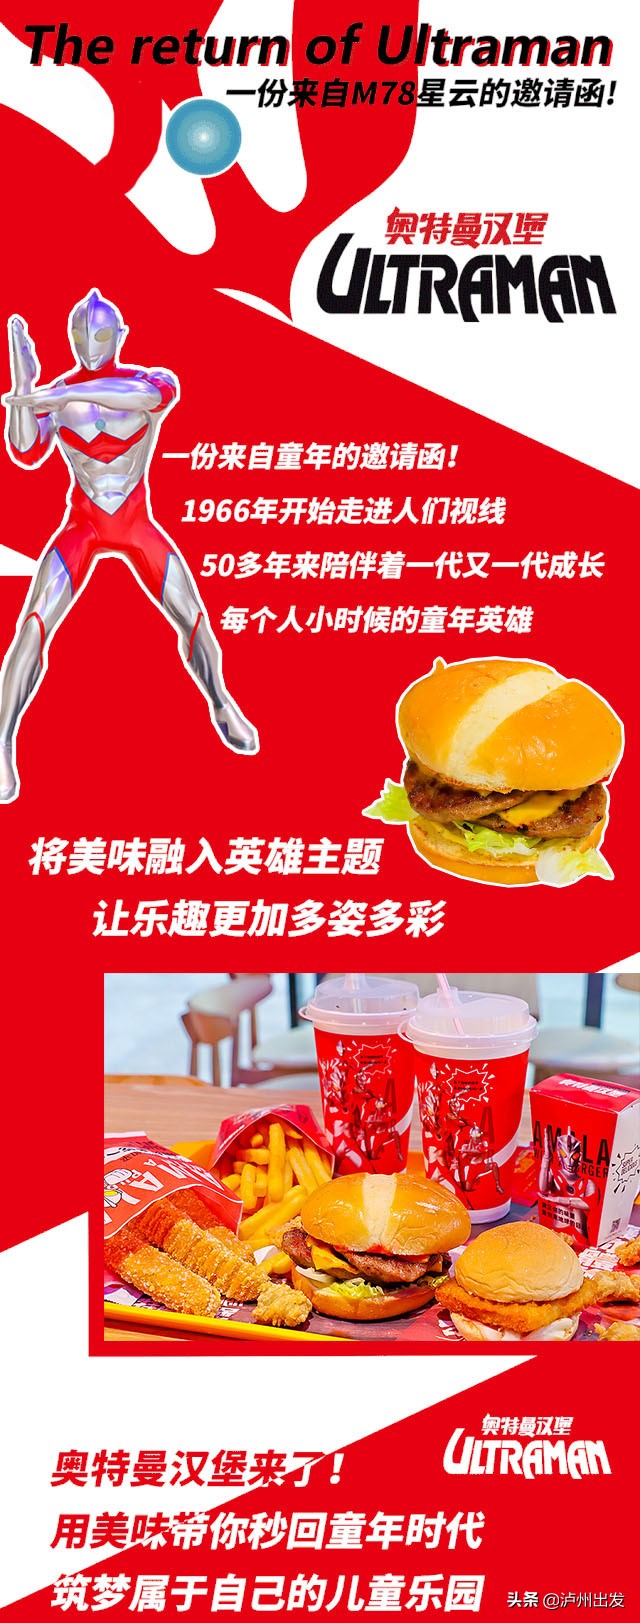 Can pull silk, can shed juice! Lu city Jing shows Aoteman thematic hamburger inn! Adjoining child is greedy cried